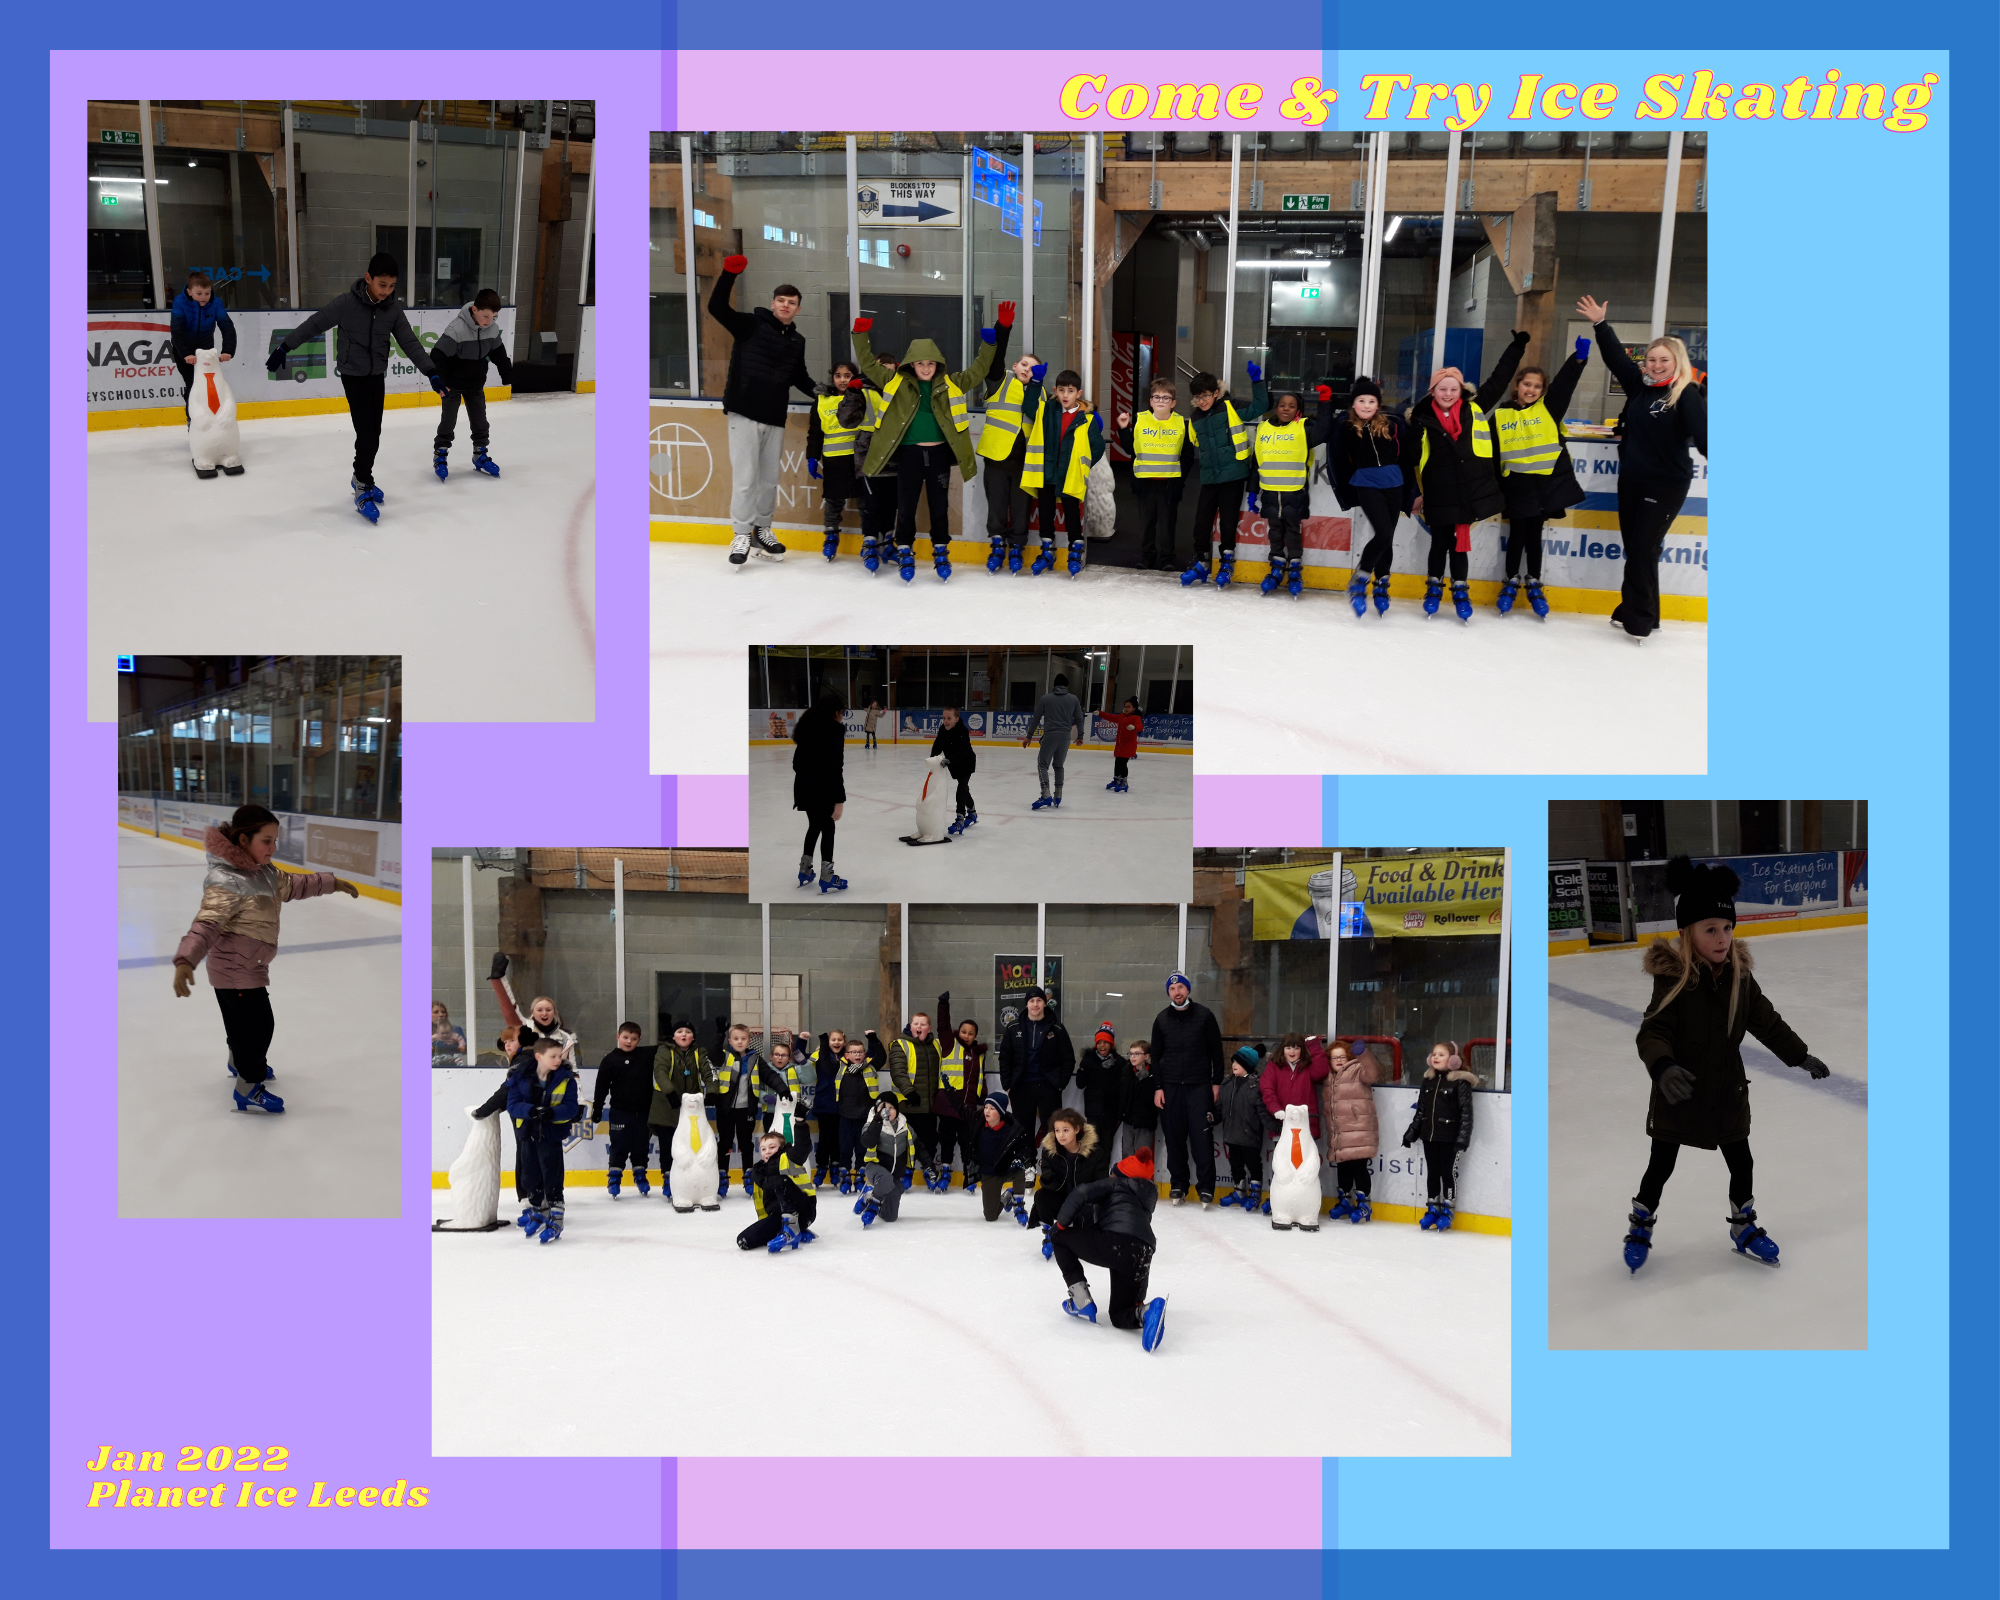 Children at an ice skating event.